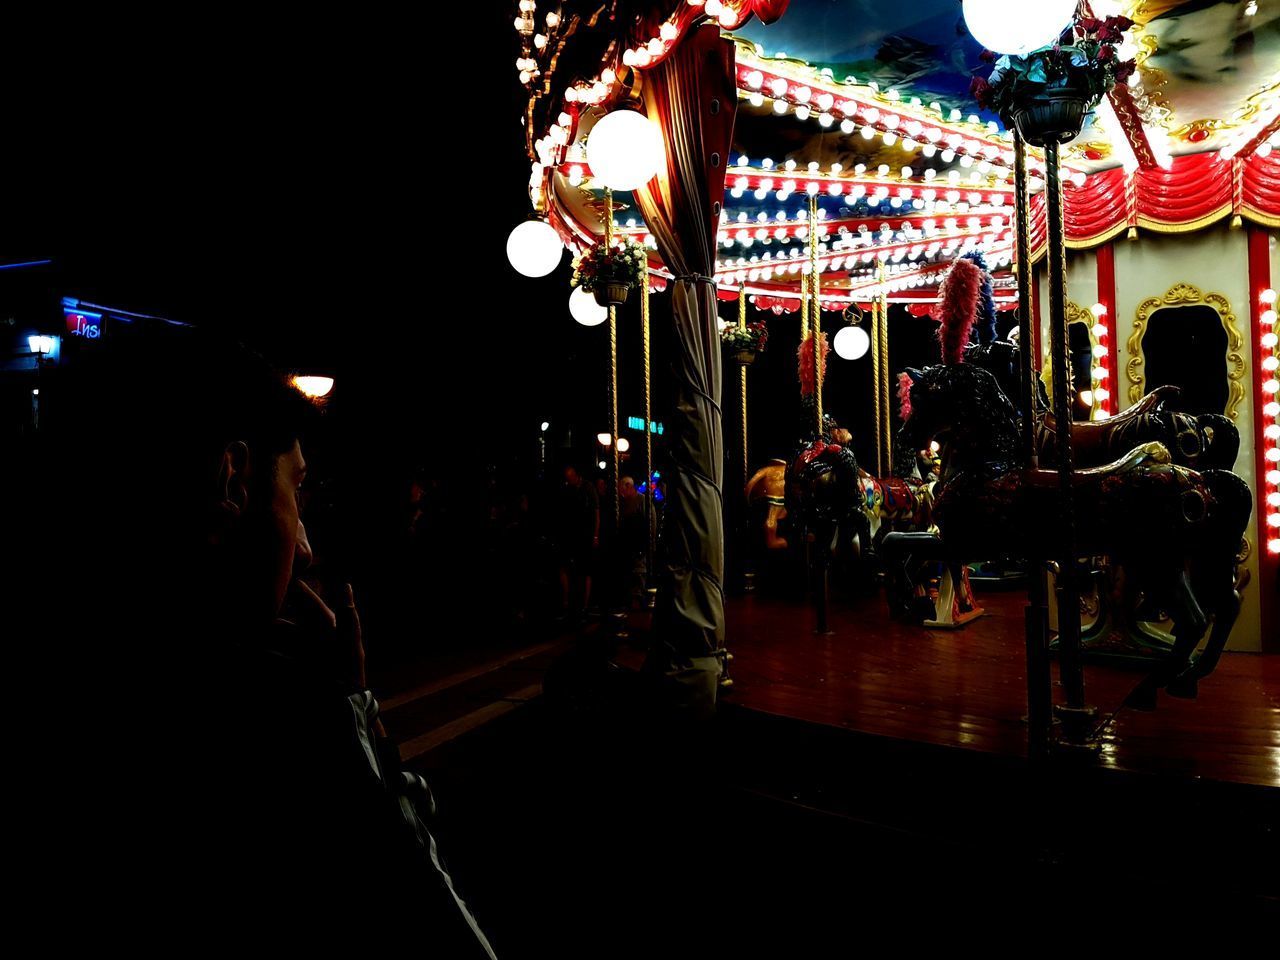 REAR VIEW OF PEOPLE AT ILLUMINATED AMUSEMENT PARK